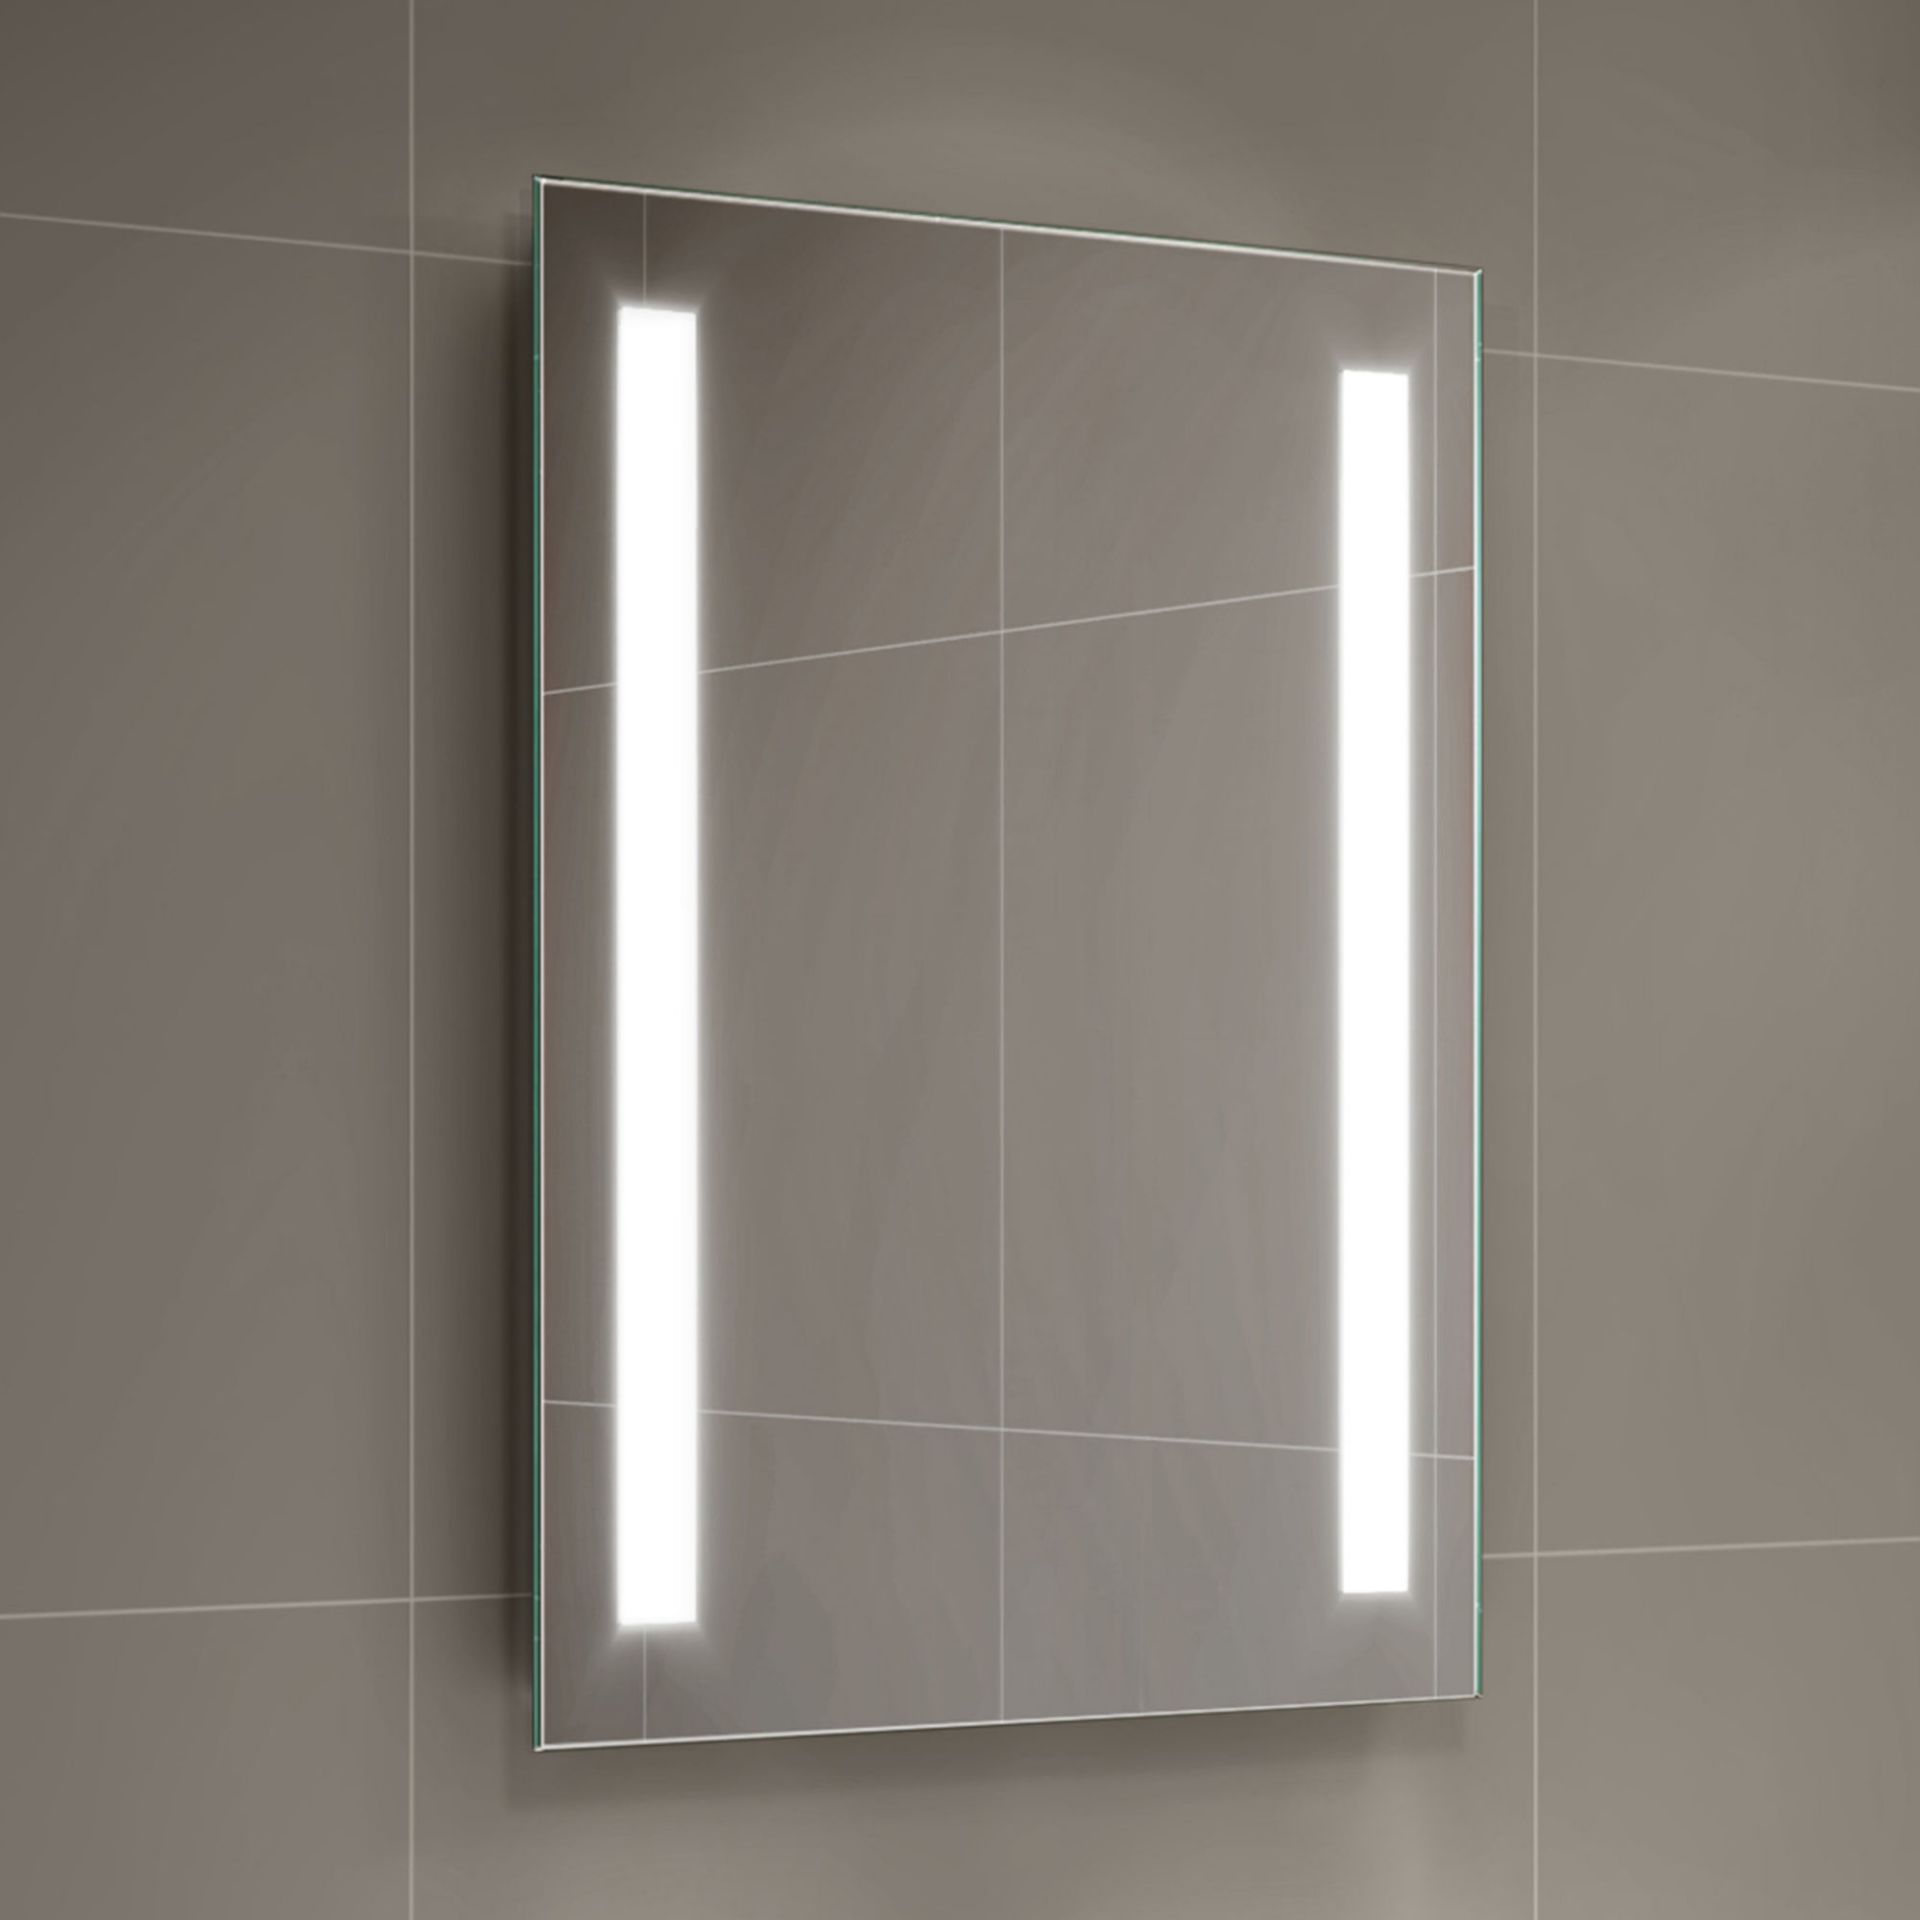 (ZL153) 500x700mm Omega Illuminated LED Mirror - Battery Operated. Energy saving controlled On / Off